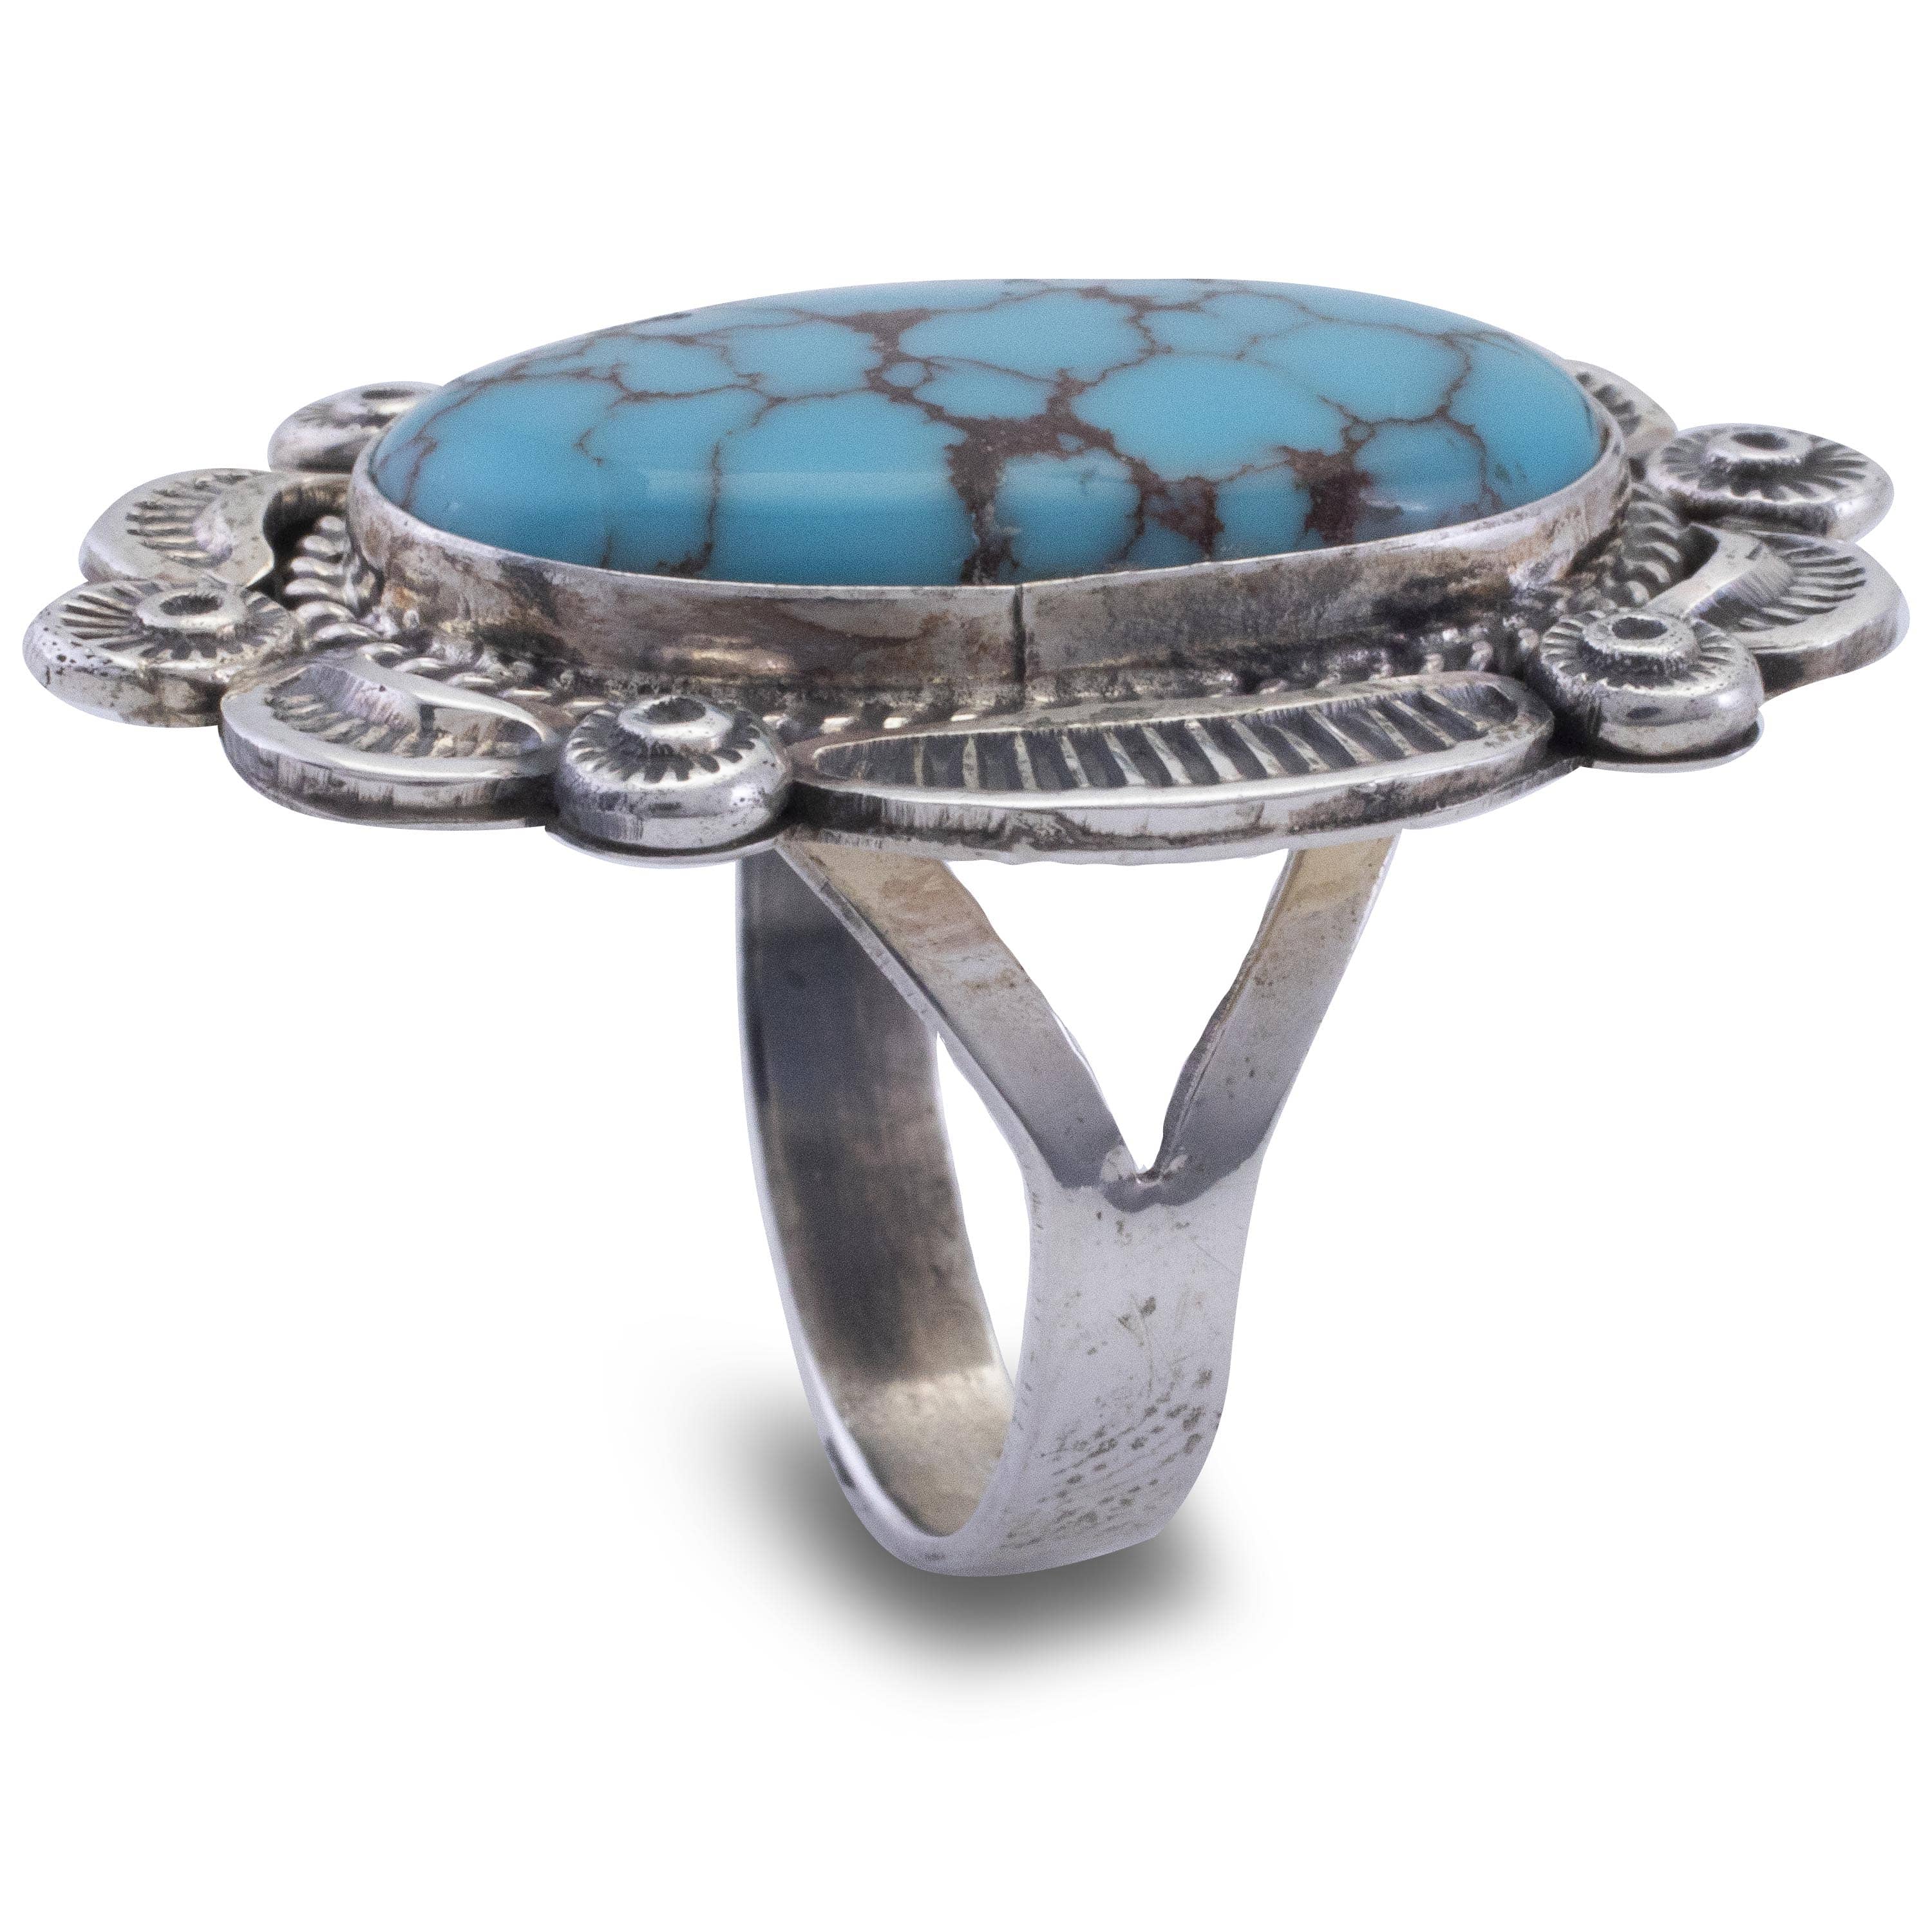 Kalifano Native American Jewelry 9.5 Ella M. Linkin Navajo Prince Turquoise USA Native American Made 925 Sterling Silver Ring NAR1200.039.95